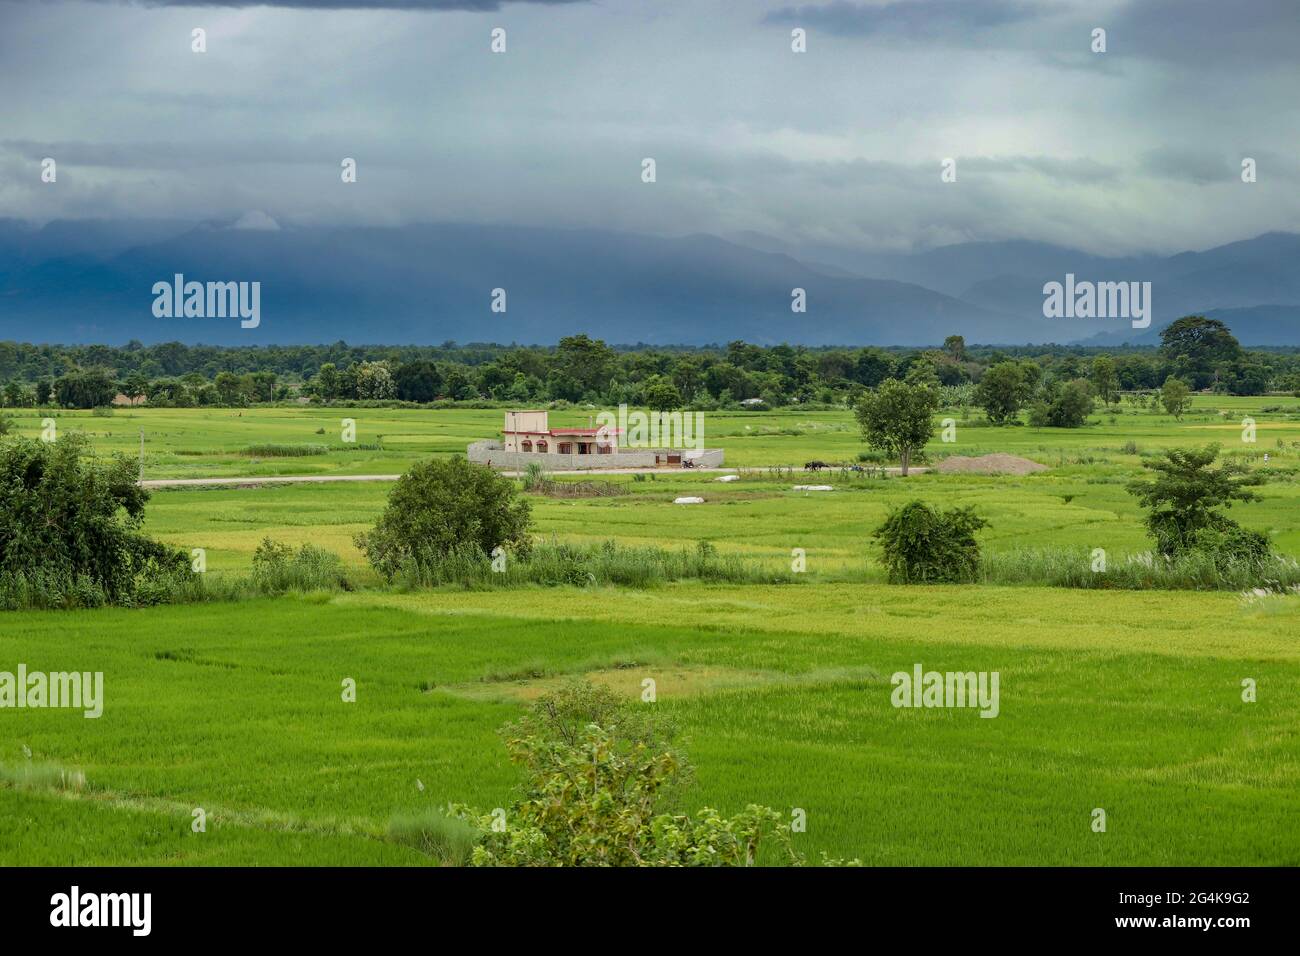 Alone House in middle of paddy field. With the message Stay alone Stay Strong. Stock Photo